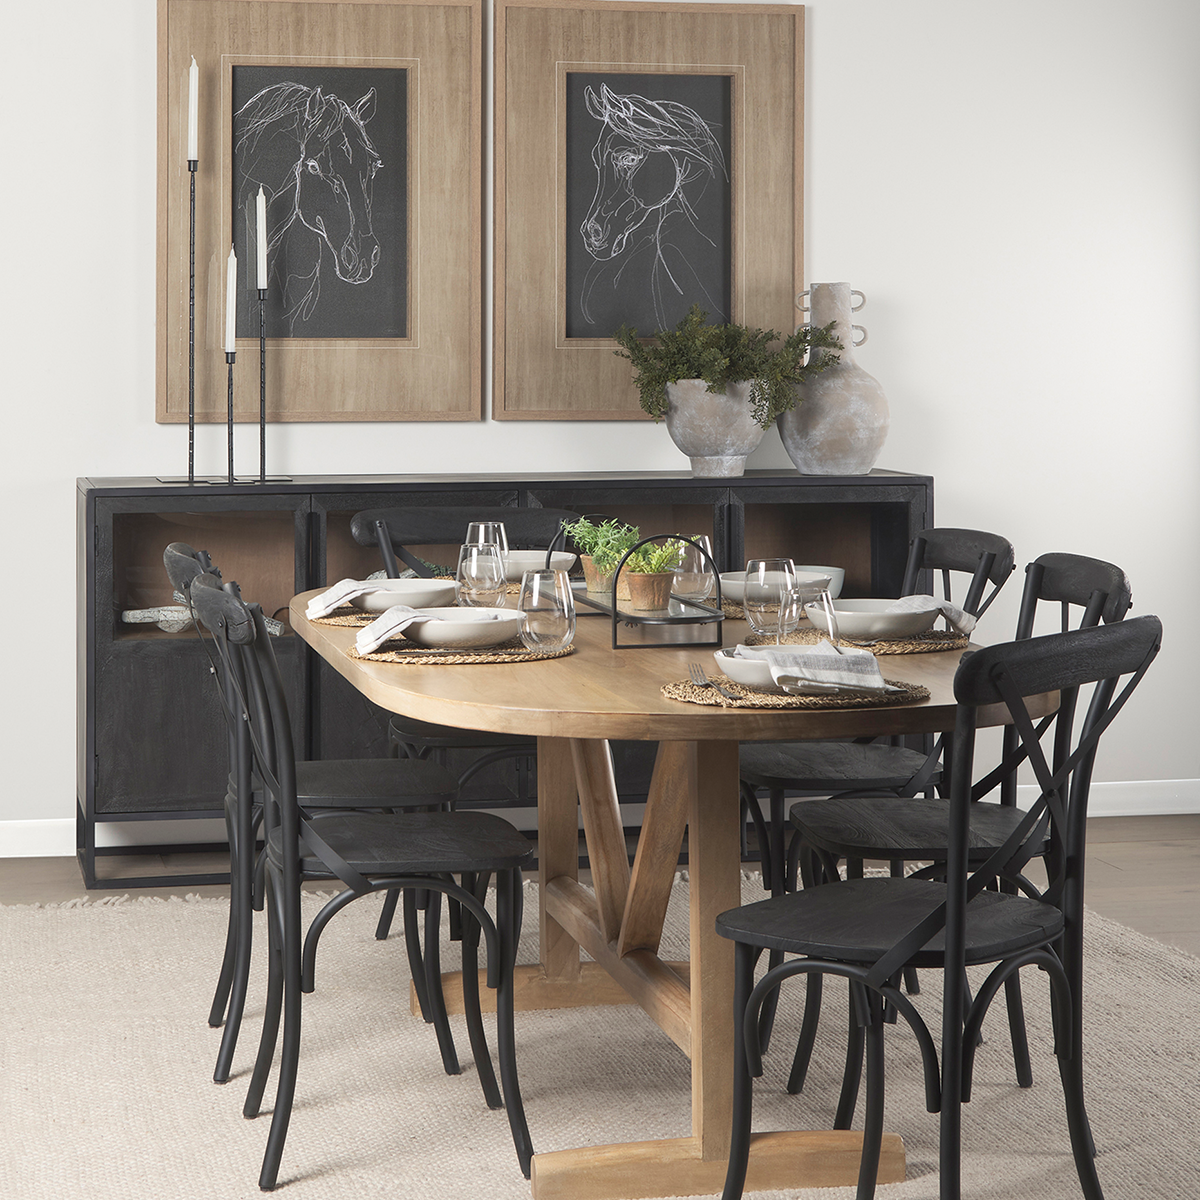 Etienne I Dining Chair - Black